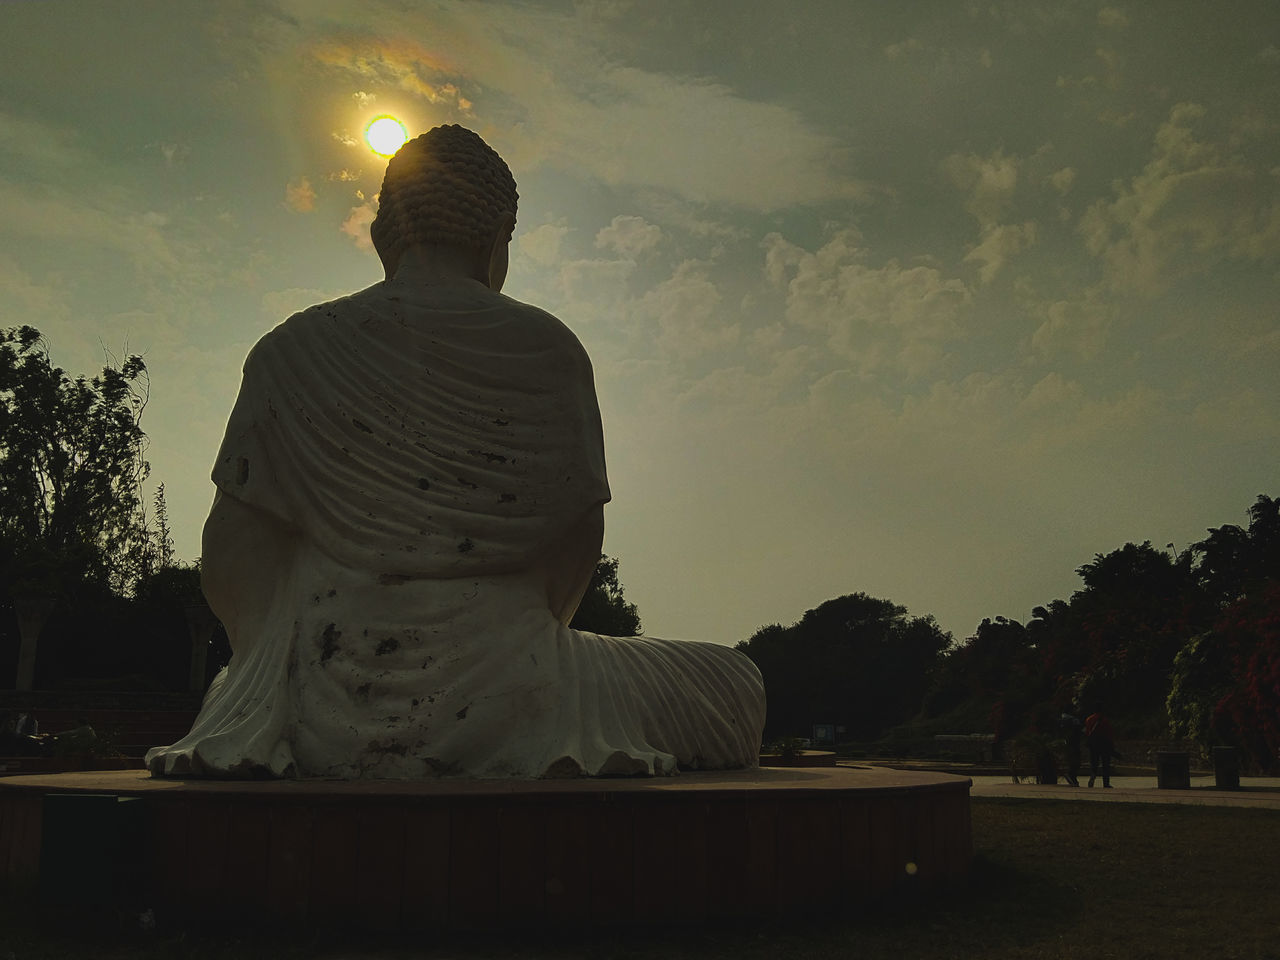 REAR VIEW OF STATUE AGAINST SKY DURING SUNSET